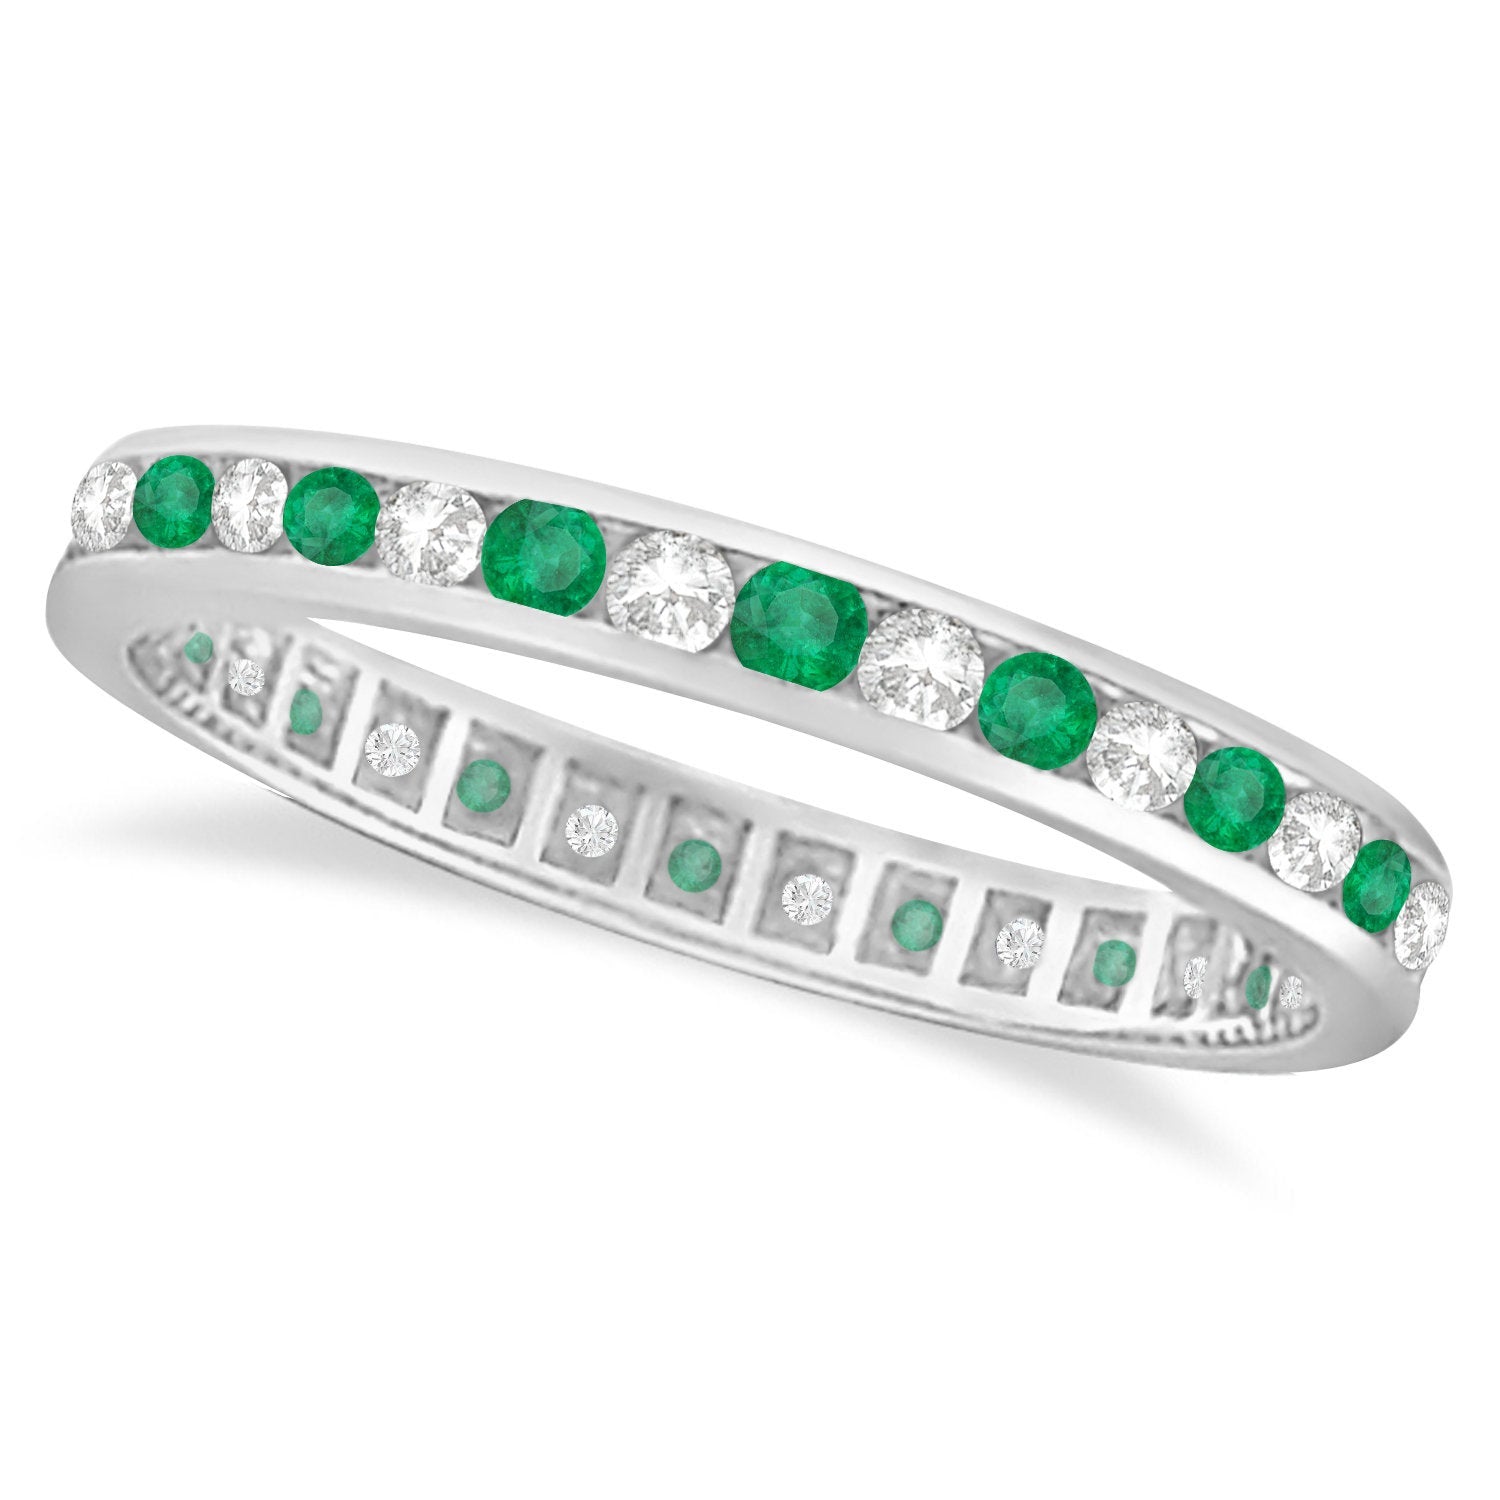 1.05 Carat Natural Diamond & Emerald Eternity Channel Ring Band 14K White Gold